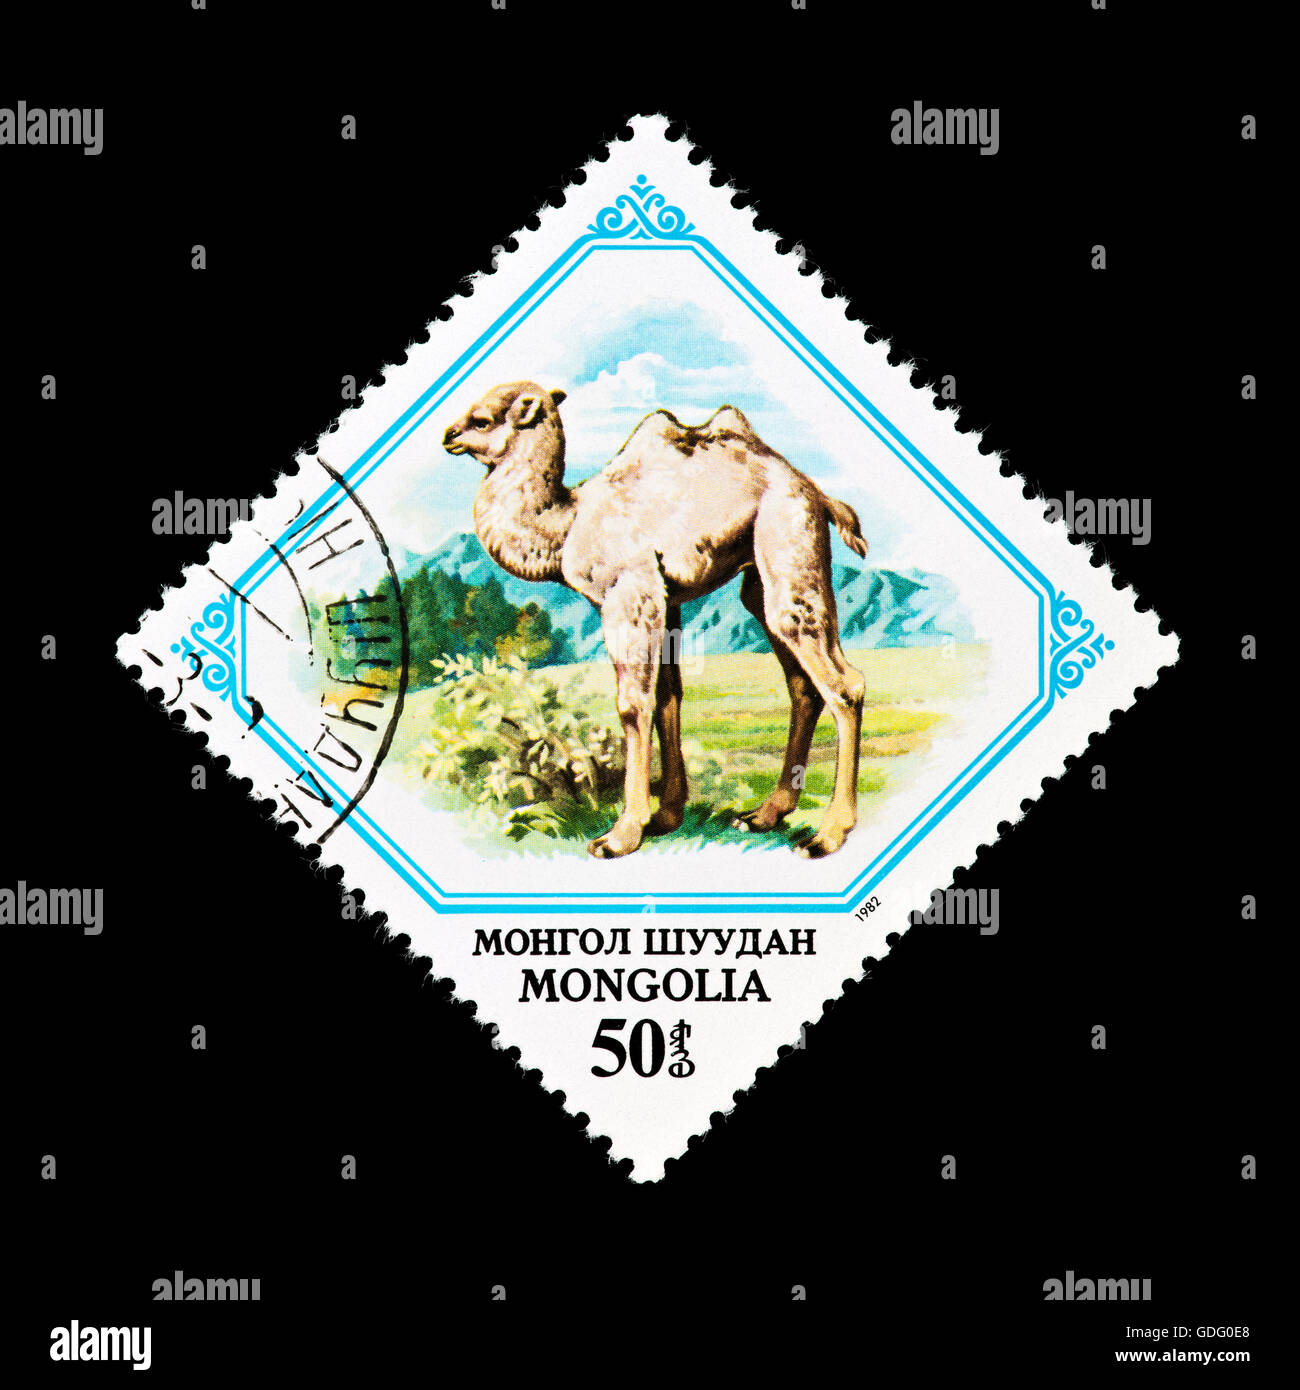 Fox & Camel: The Stamp Collection - The Adventures of Fox and Camel